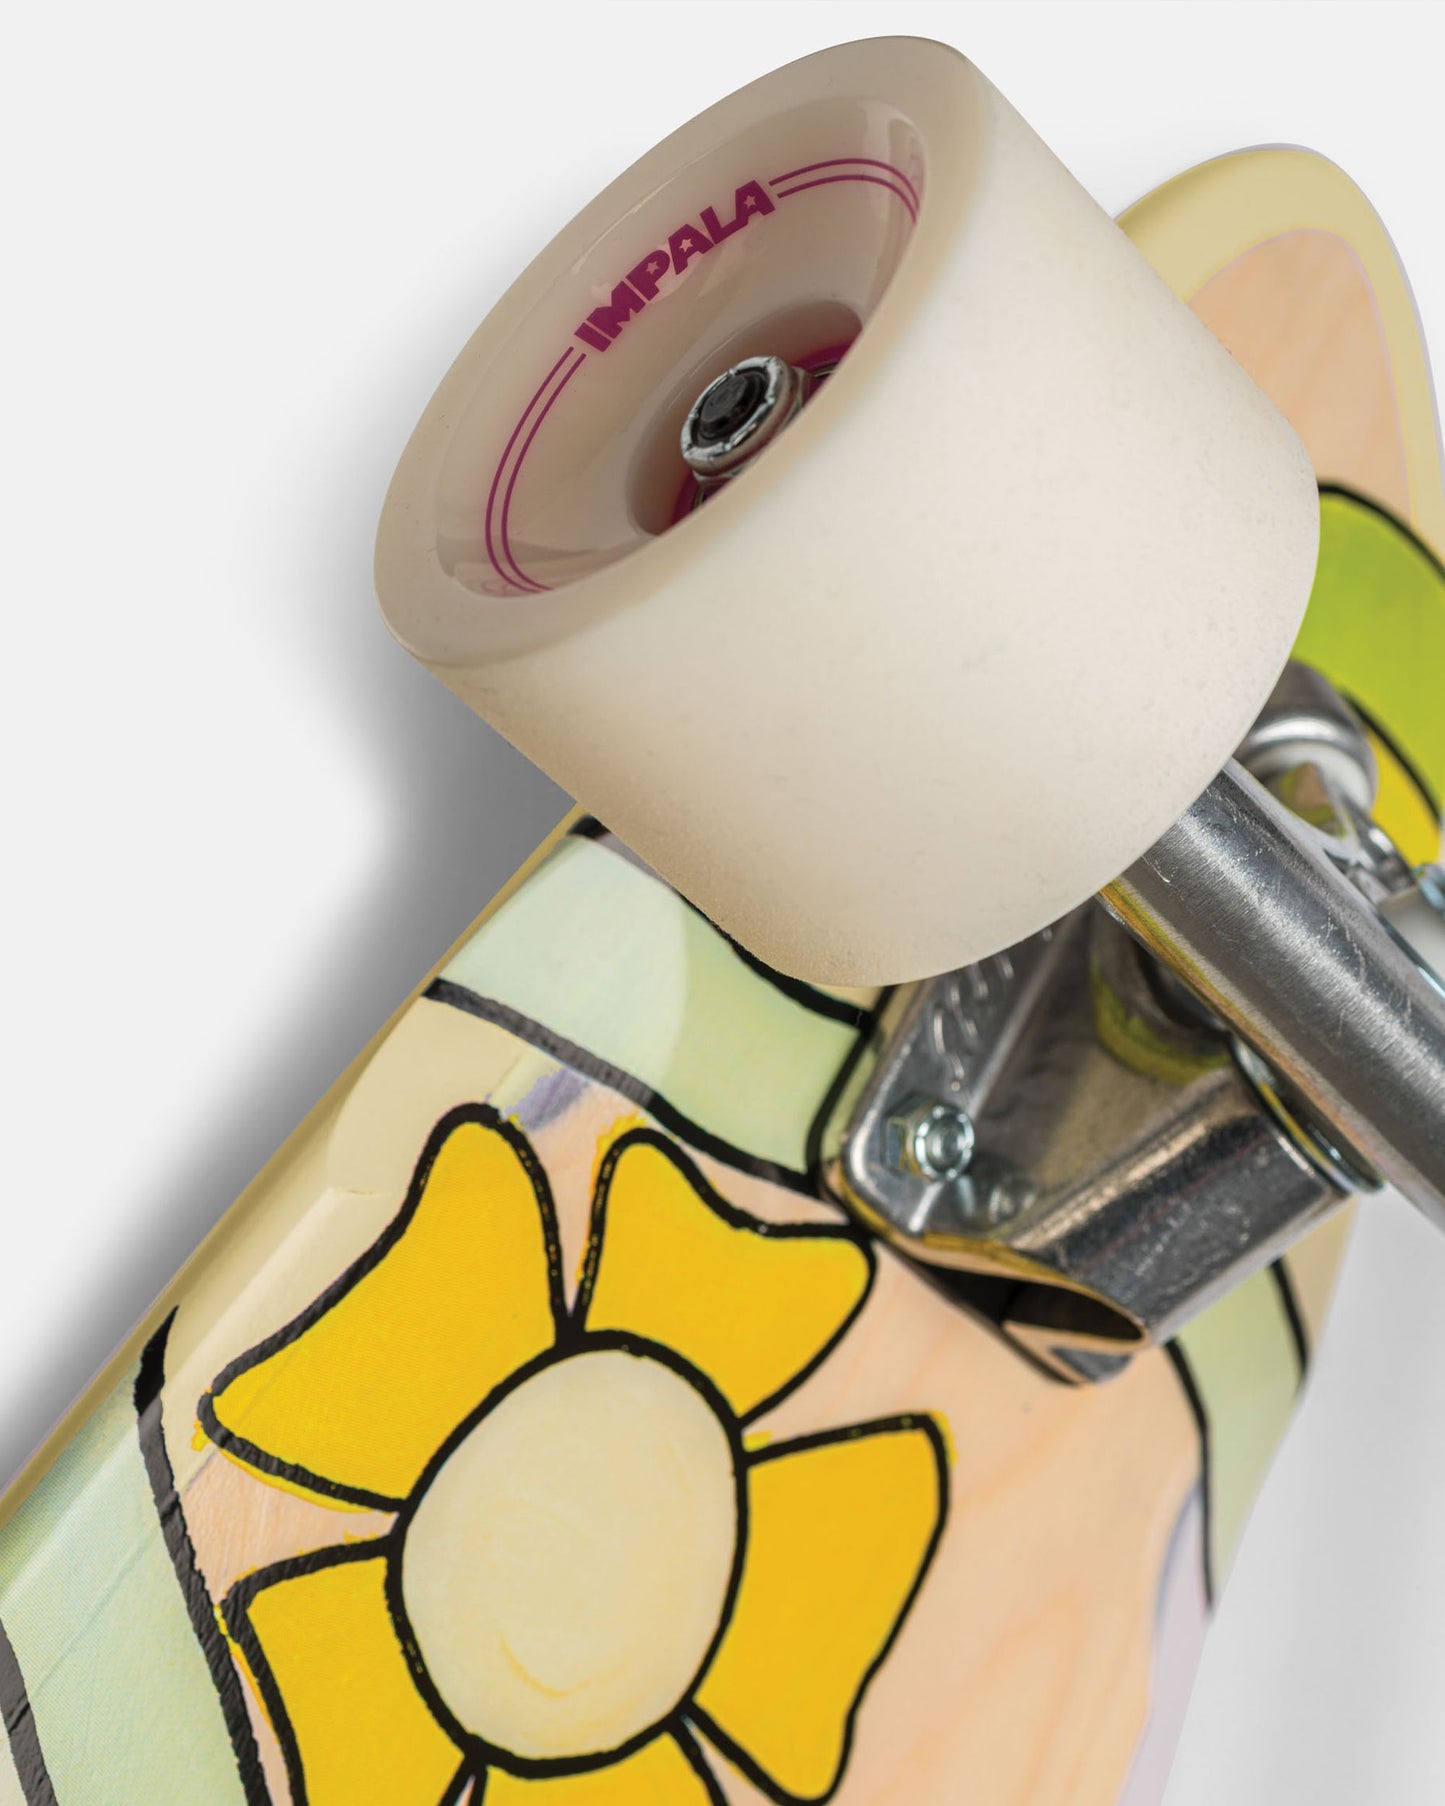 Wheel and graphic detailing of Impala Jupiter Longboard - Birdy Floral